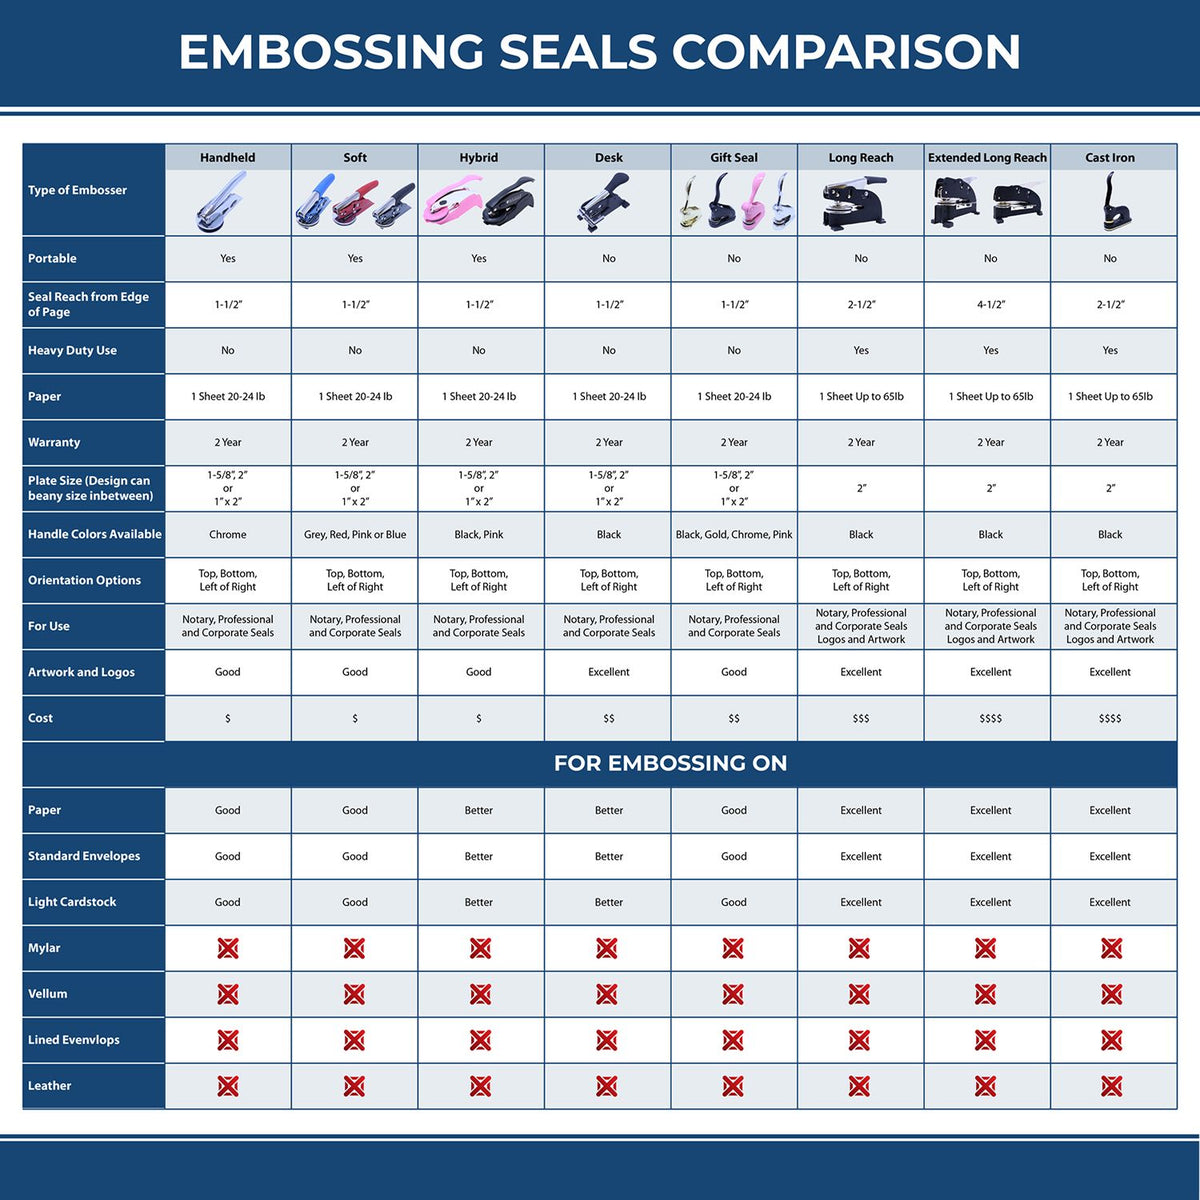 A comparison chart for the different types of mount models available for the Hybrid Idaho Land Surveyor Seal